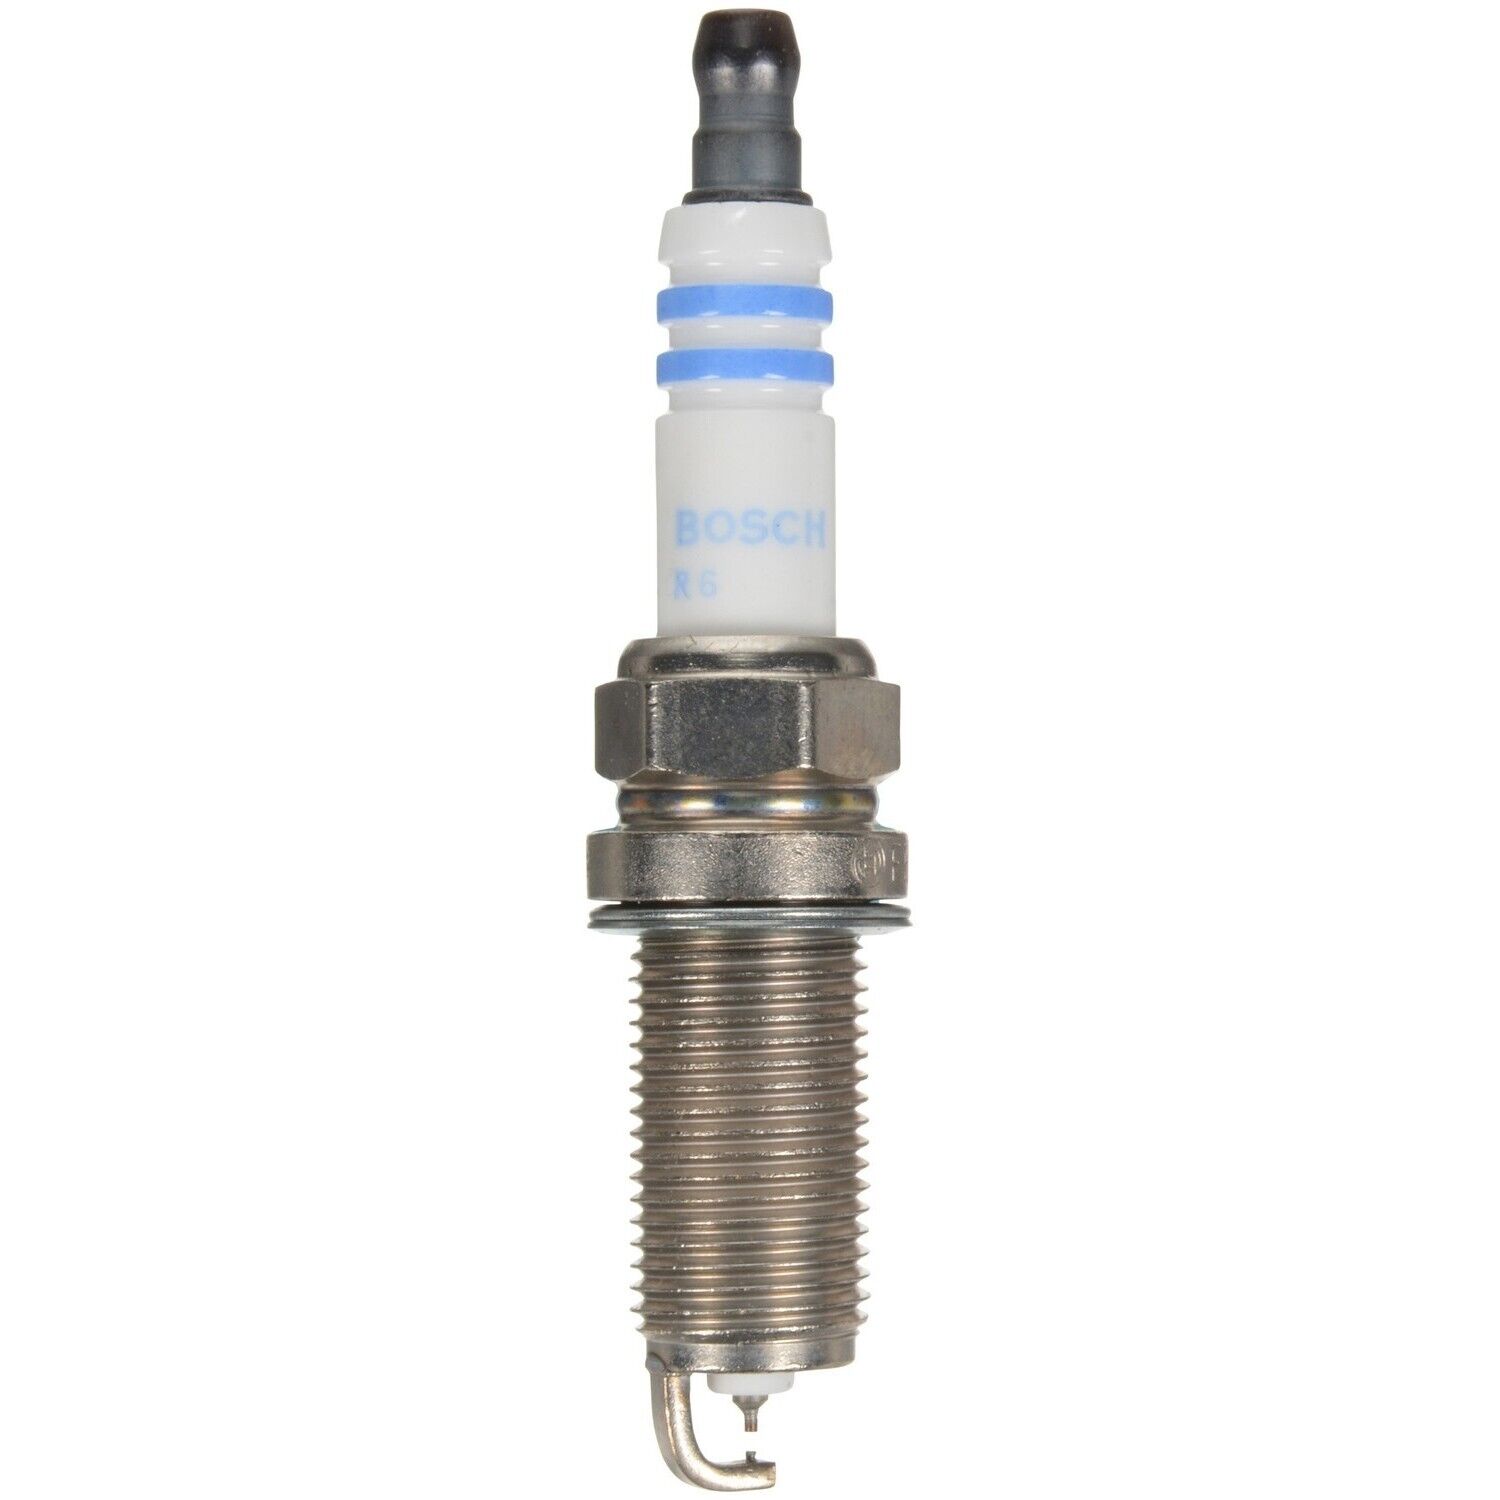 Bosch 96309 Double Iridium Pin-to-Pin Spark Plug for ILX Civic GS300 IS300 RC350